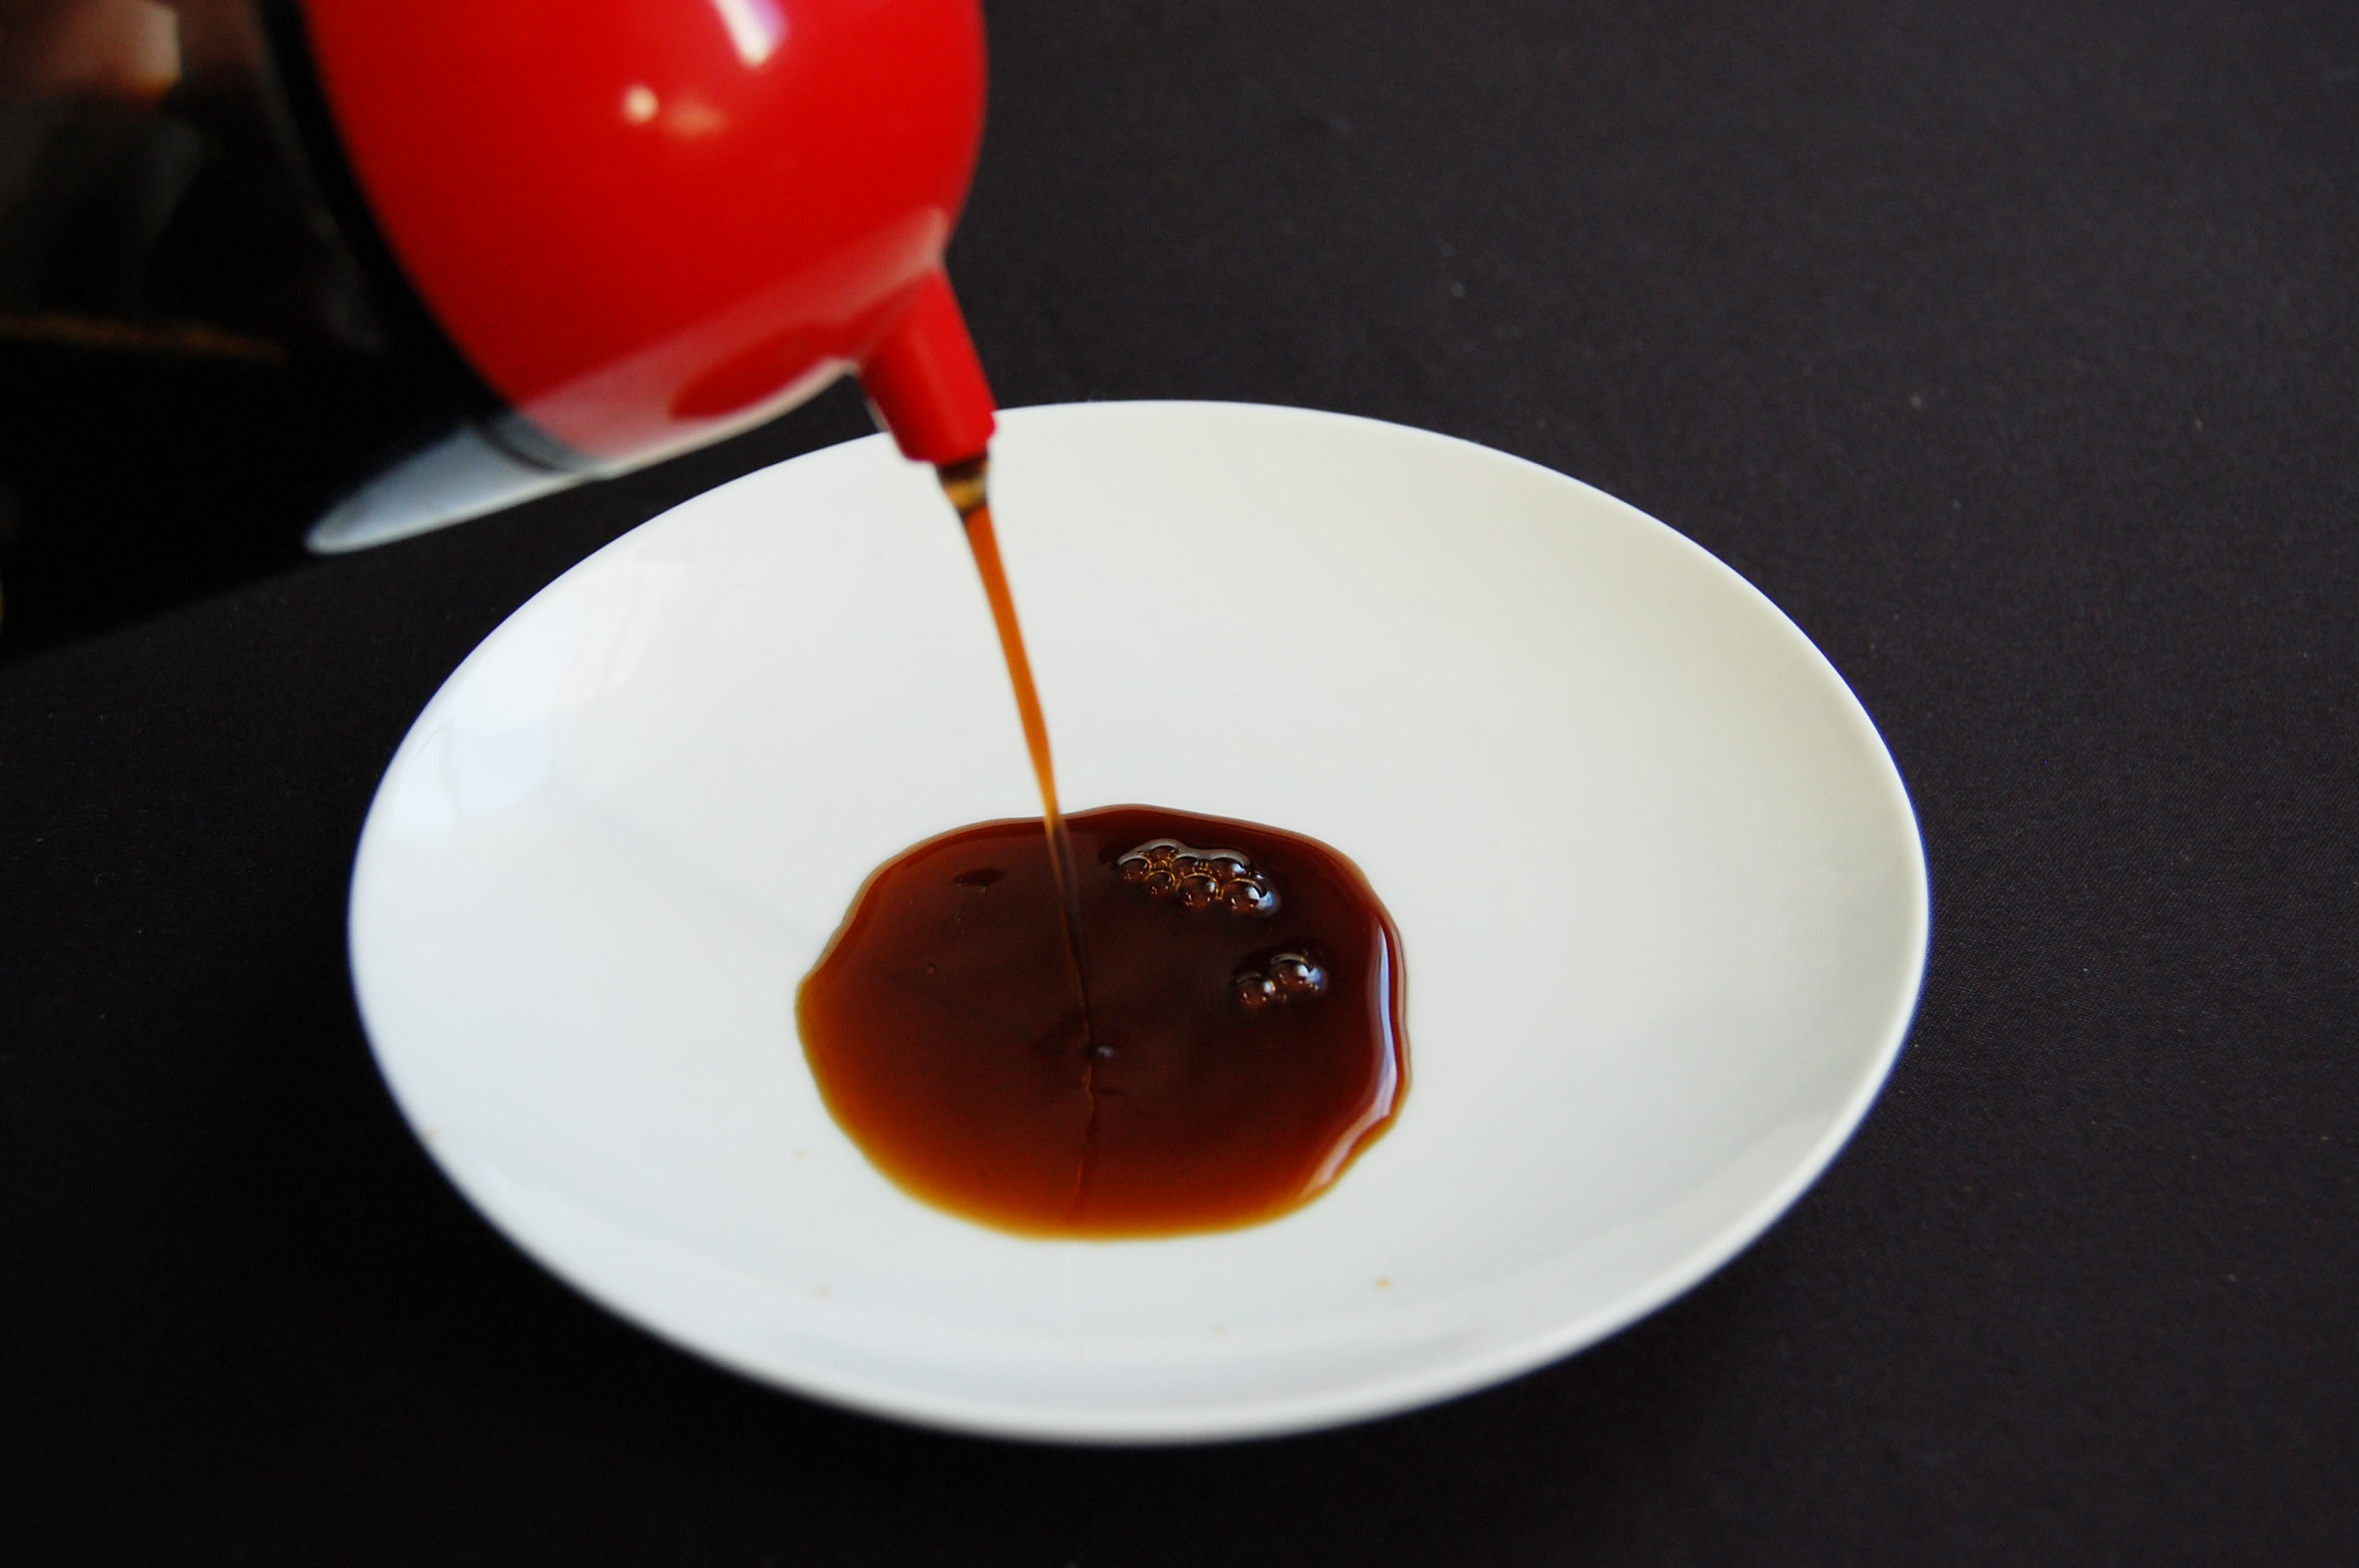 A small dish, into which a soy sauce dispenser is pouring a small amount of soy sauce.